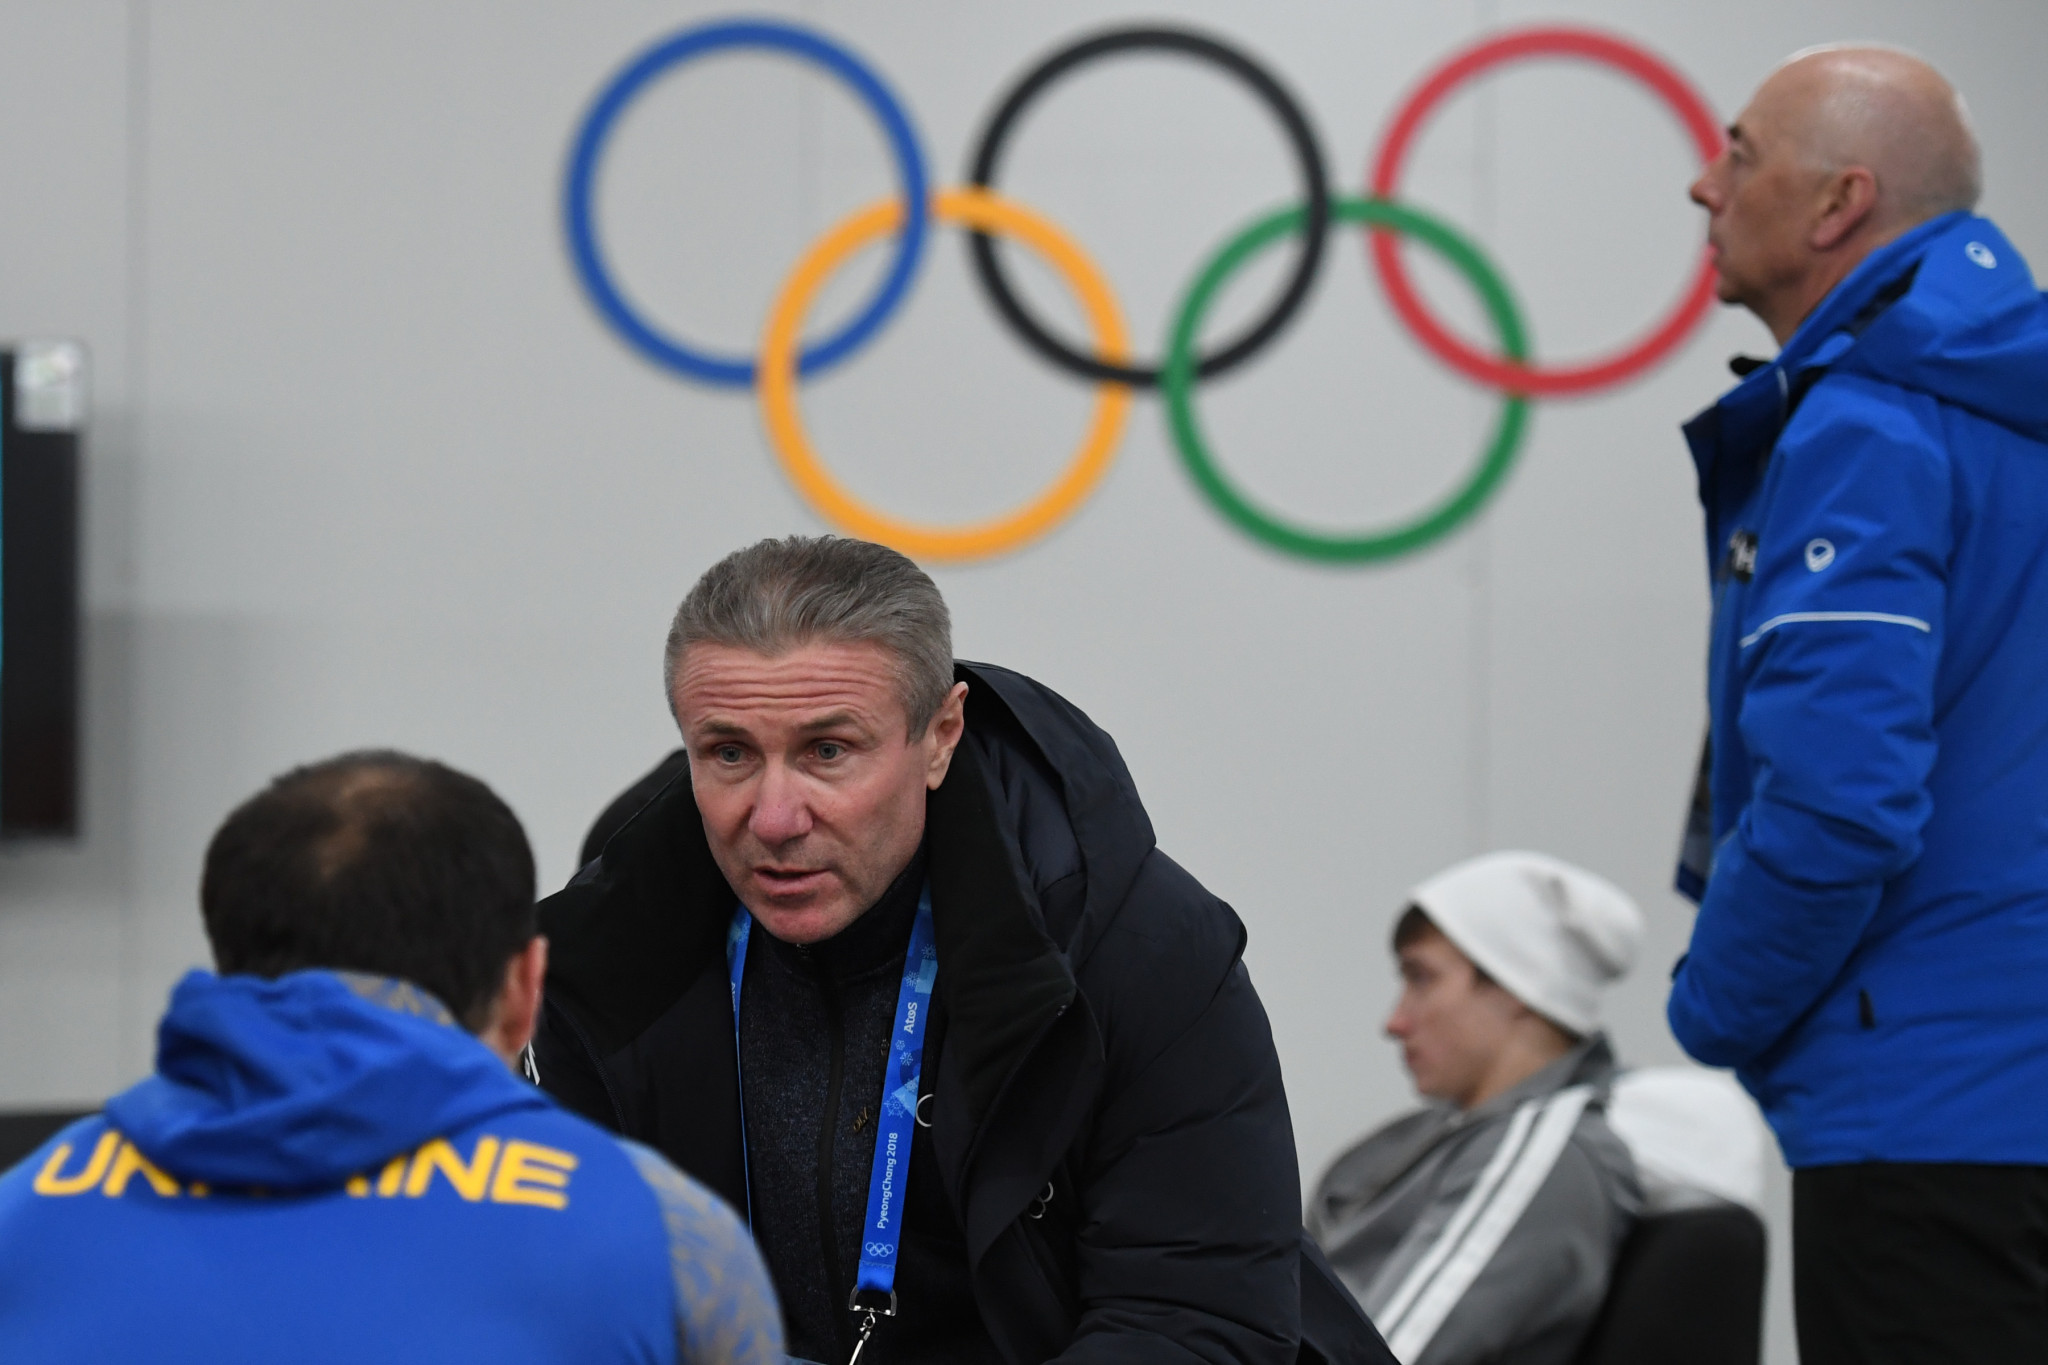 The AIU said they would not be taking any further action against Sergey Bubka ©Getty Images